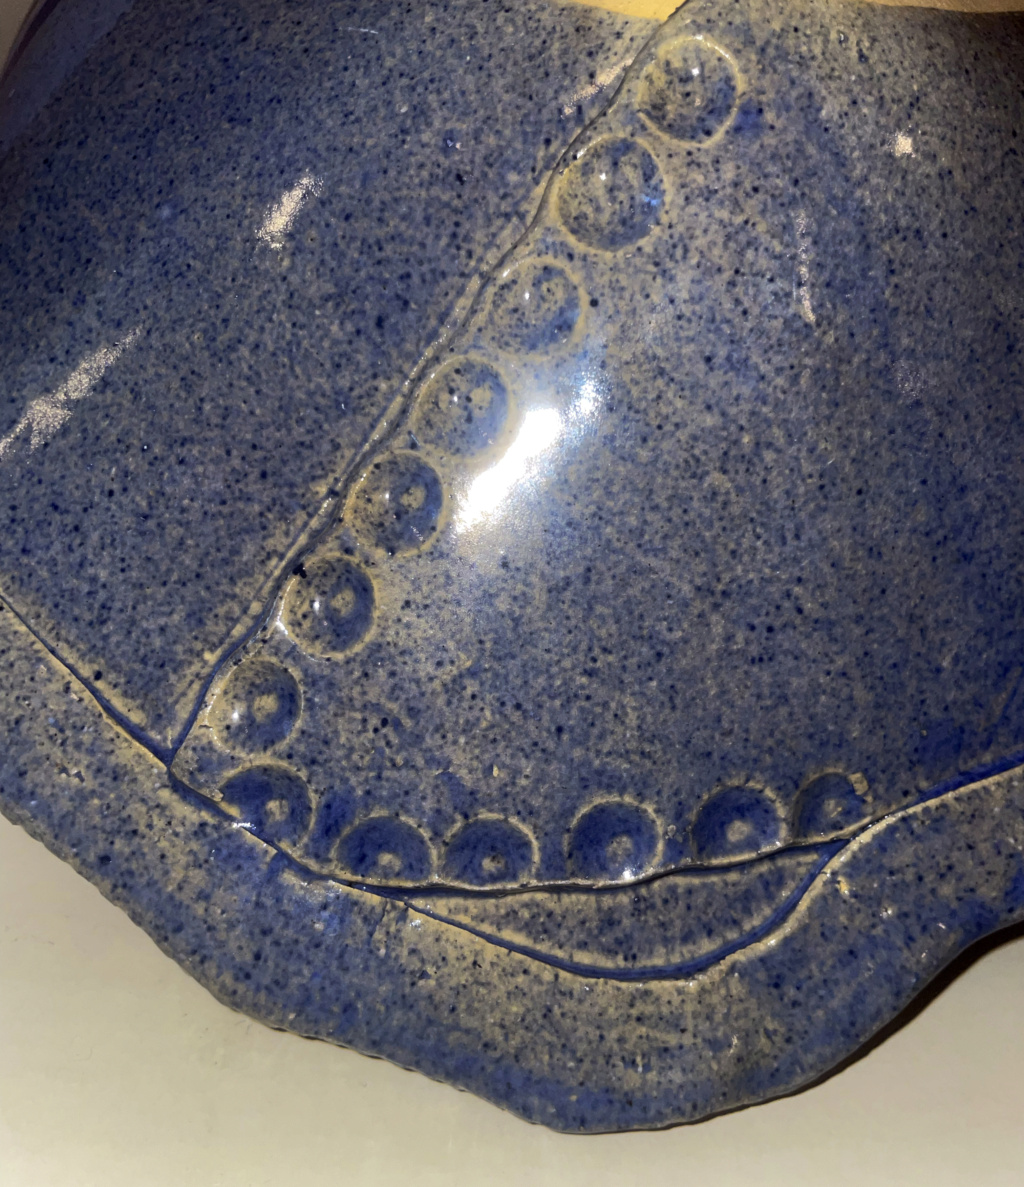 Blue Stamped & Textured Fruit/Salad Bowl with Cube Handles, Marked B or BT Stampd10